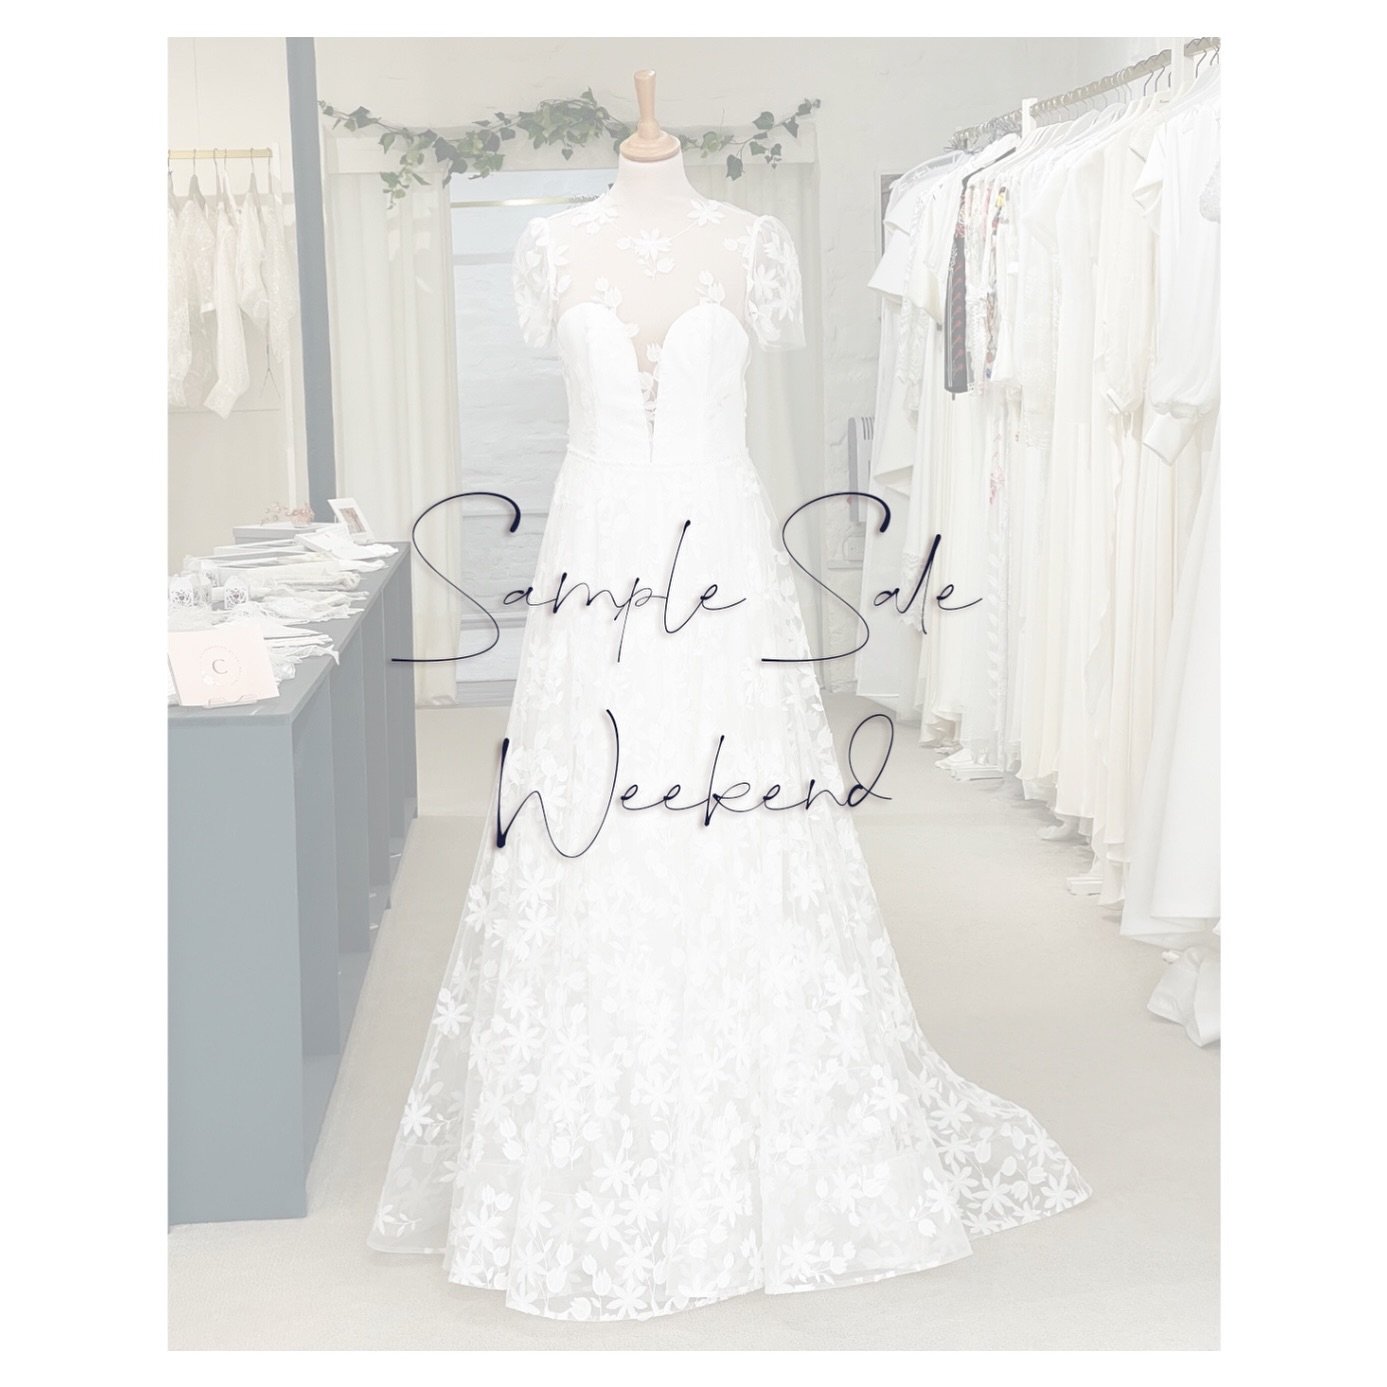 ▫️SAMPLE SALE WEEKEND▫️19-20 APRIL▫️
.
Sample sale appointments last for one hour, during which time you&rsquo;ll have exclusive use of the boutique 
.
Only sale dresses will be available to try on at this time
.
On this occasion, our sale dresses ar